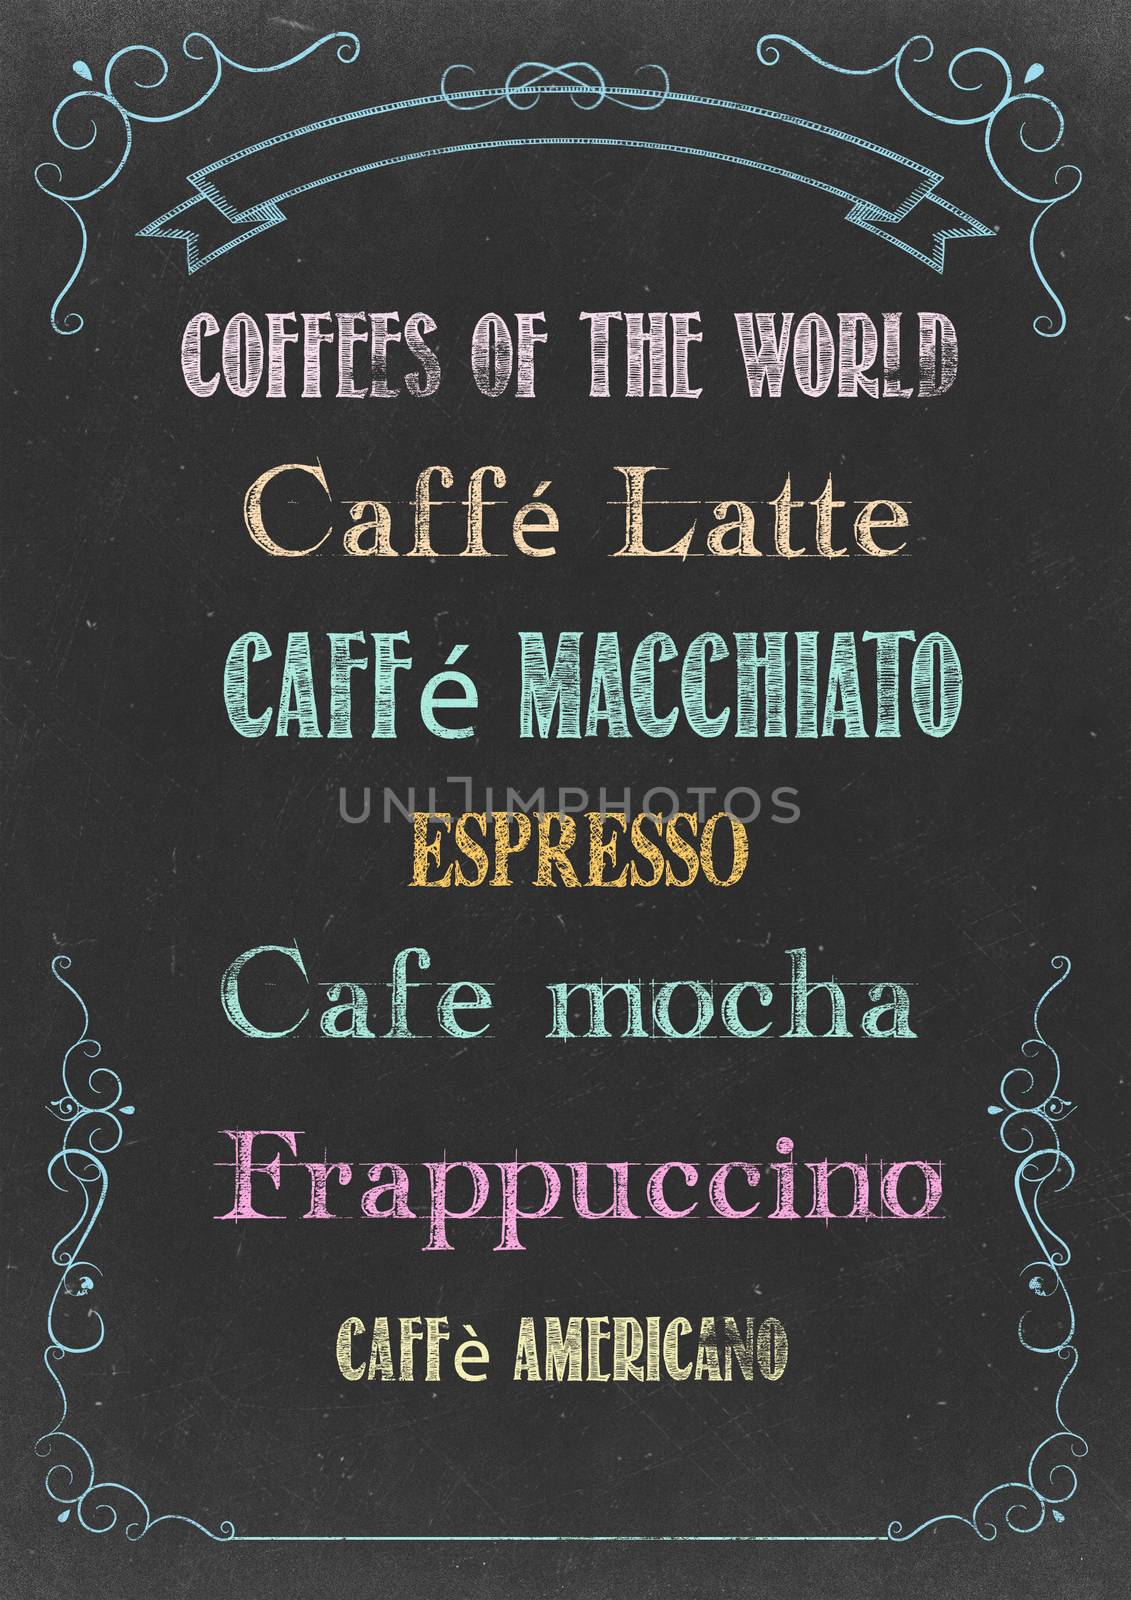 Chalkboard with "COFFEES OF THE WORLD" Hand Drawn in Chalks